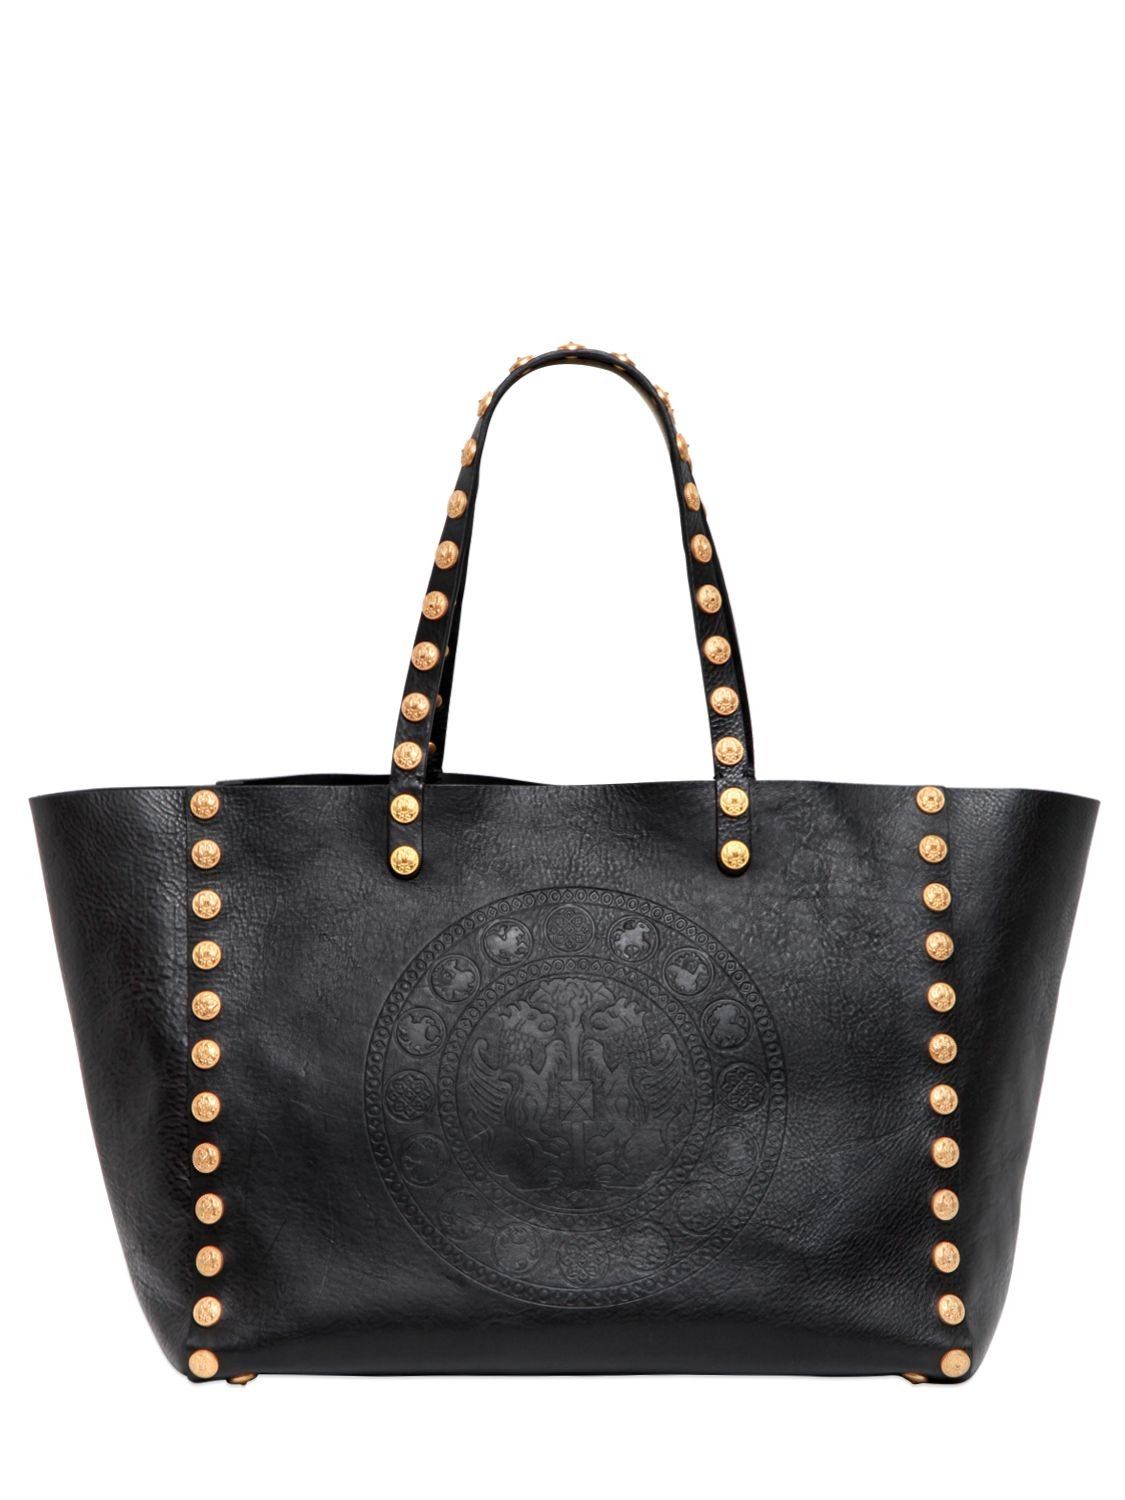 Valentino Gryphon Studded Leather Tote Bag in Black | Lyst